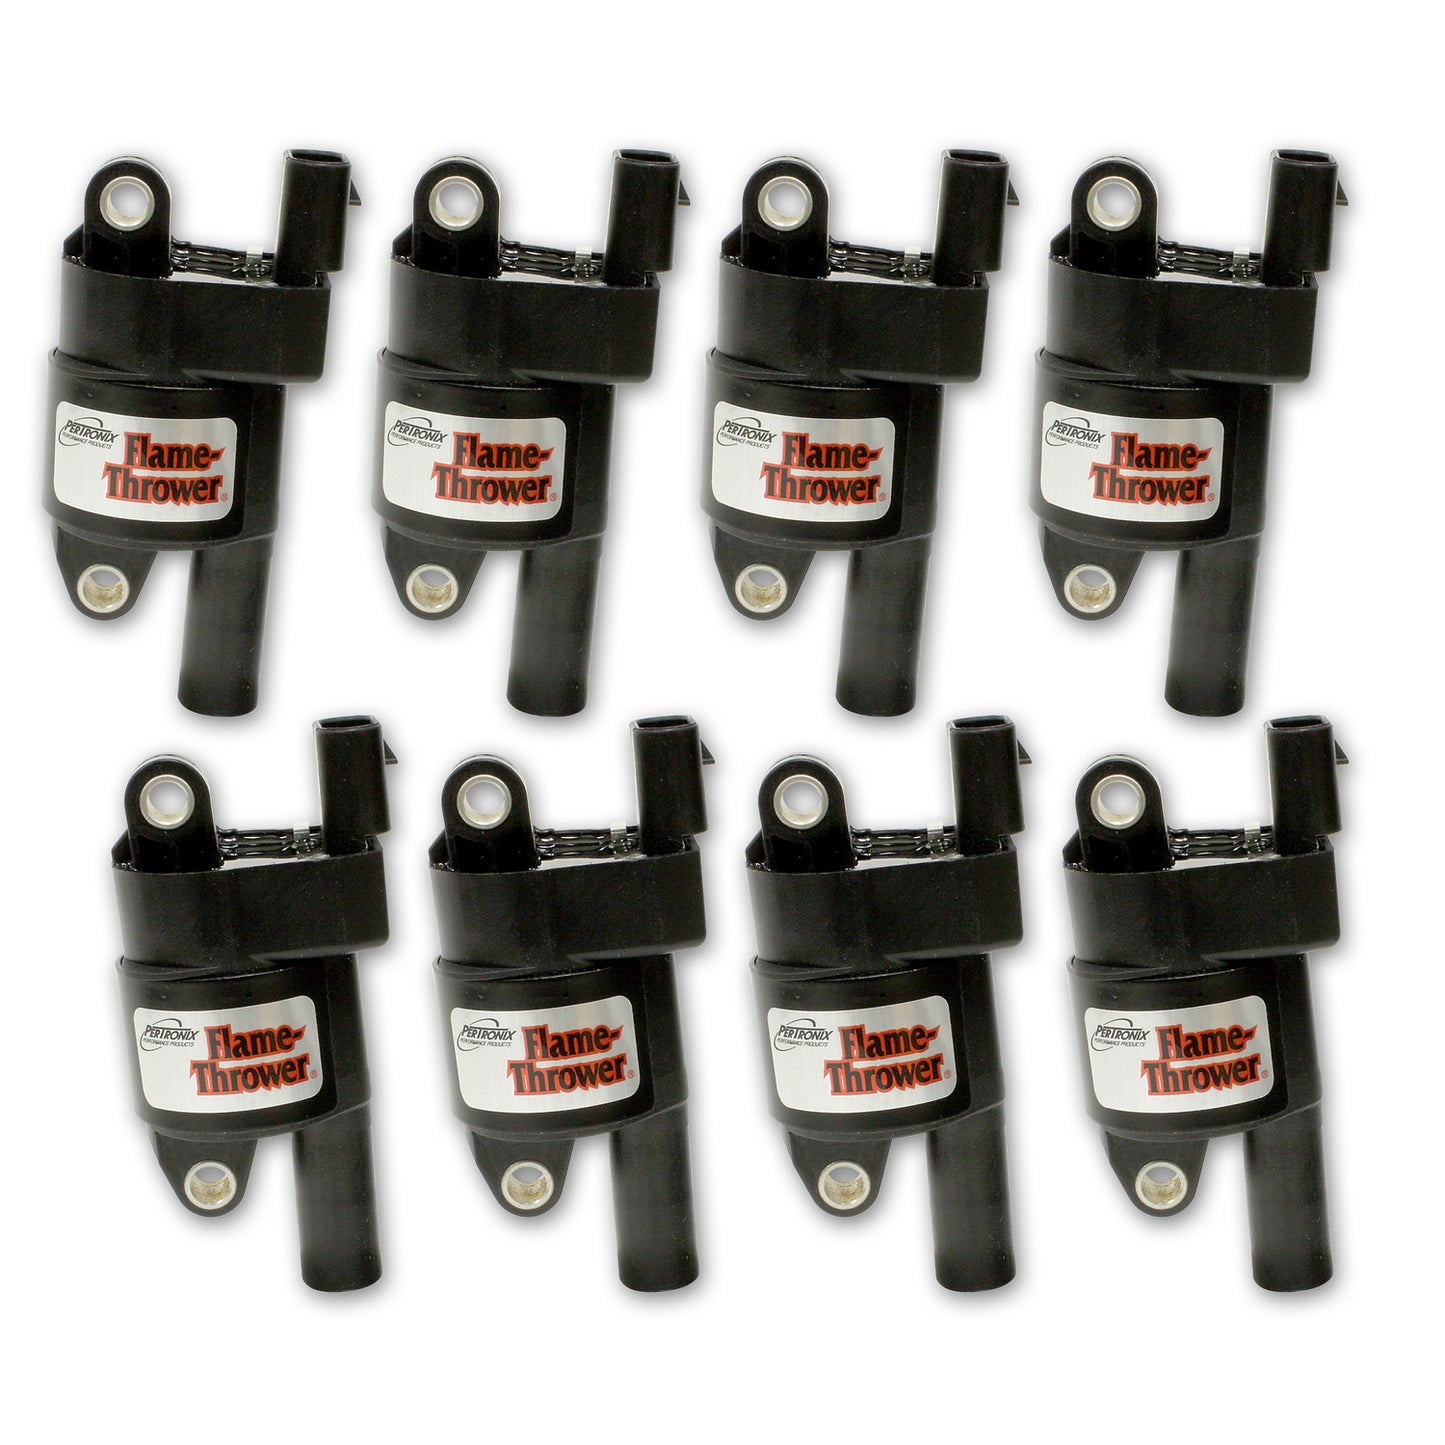 Pertronix 30838 Flame-Thrower Smart Ignition Performance Replacement Coil GM LS2/LS3/LS7 Engines set of 8